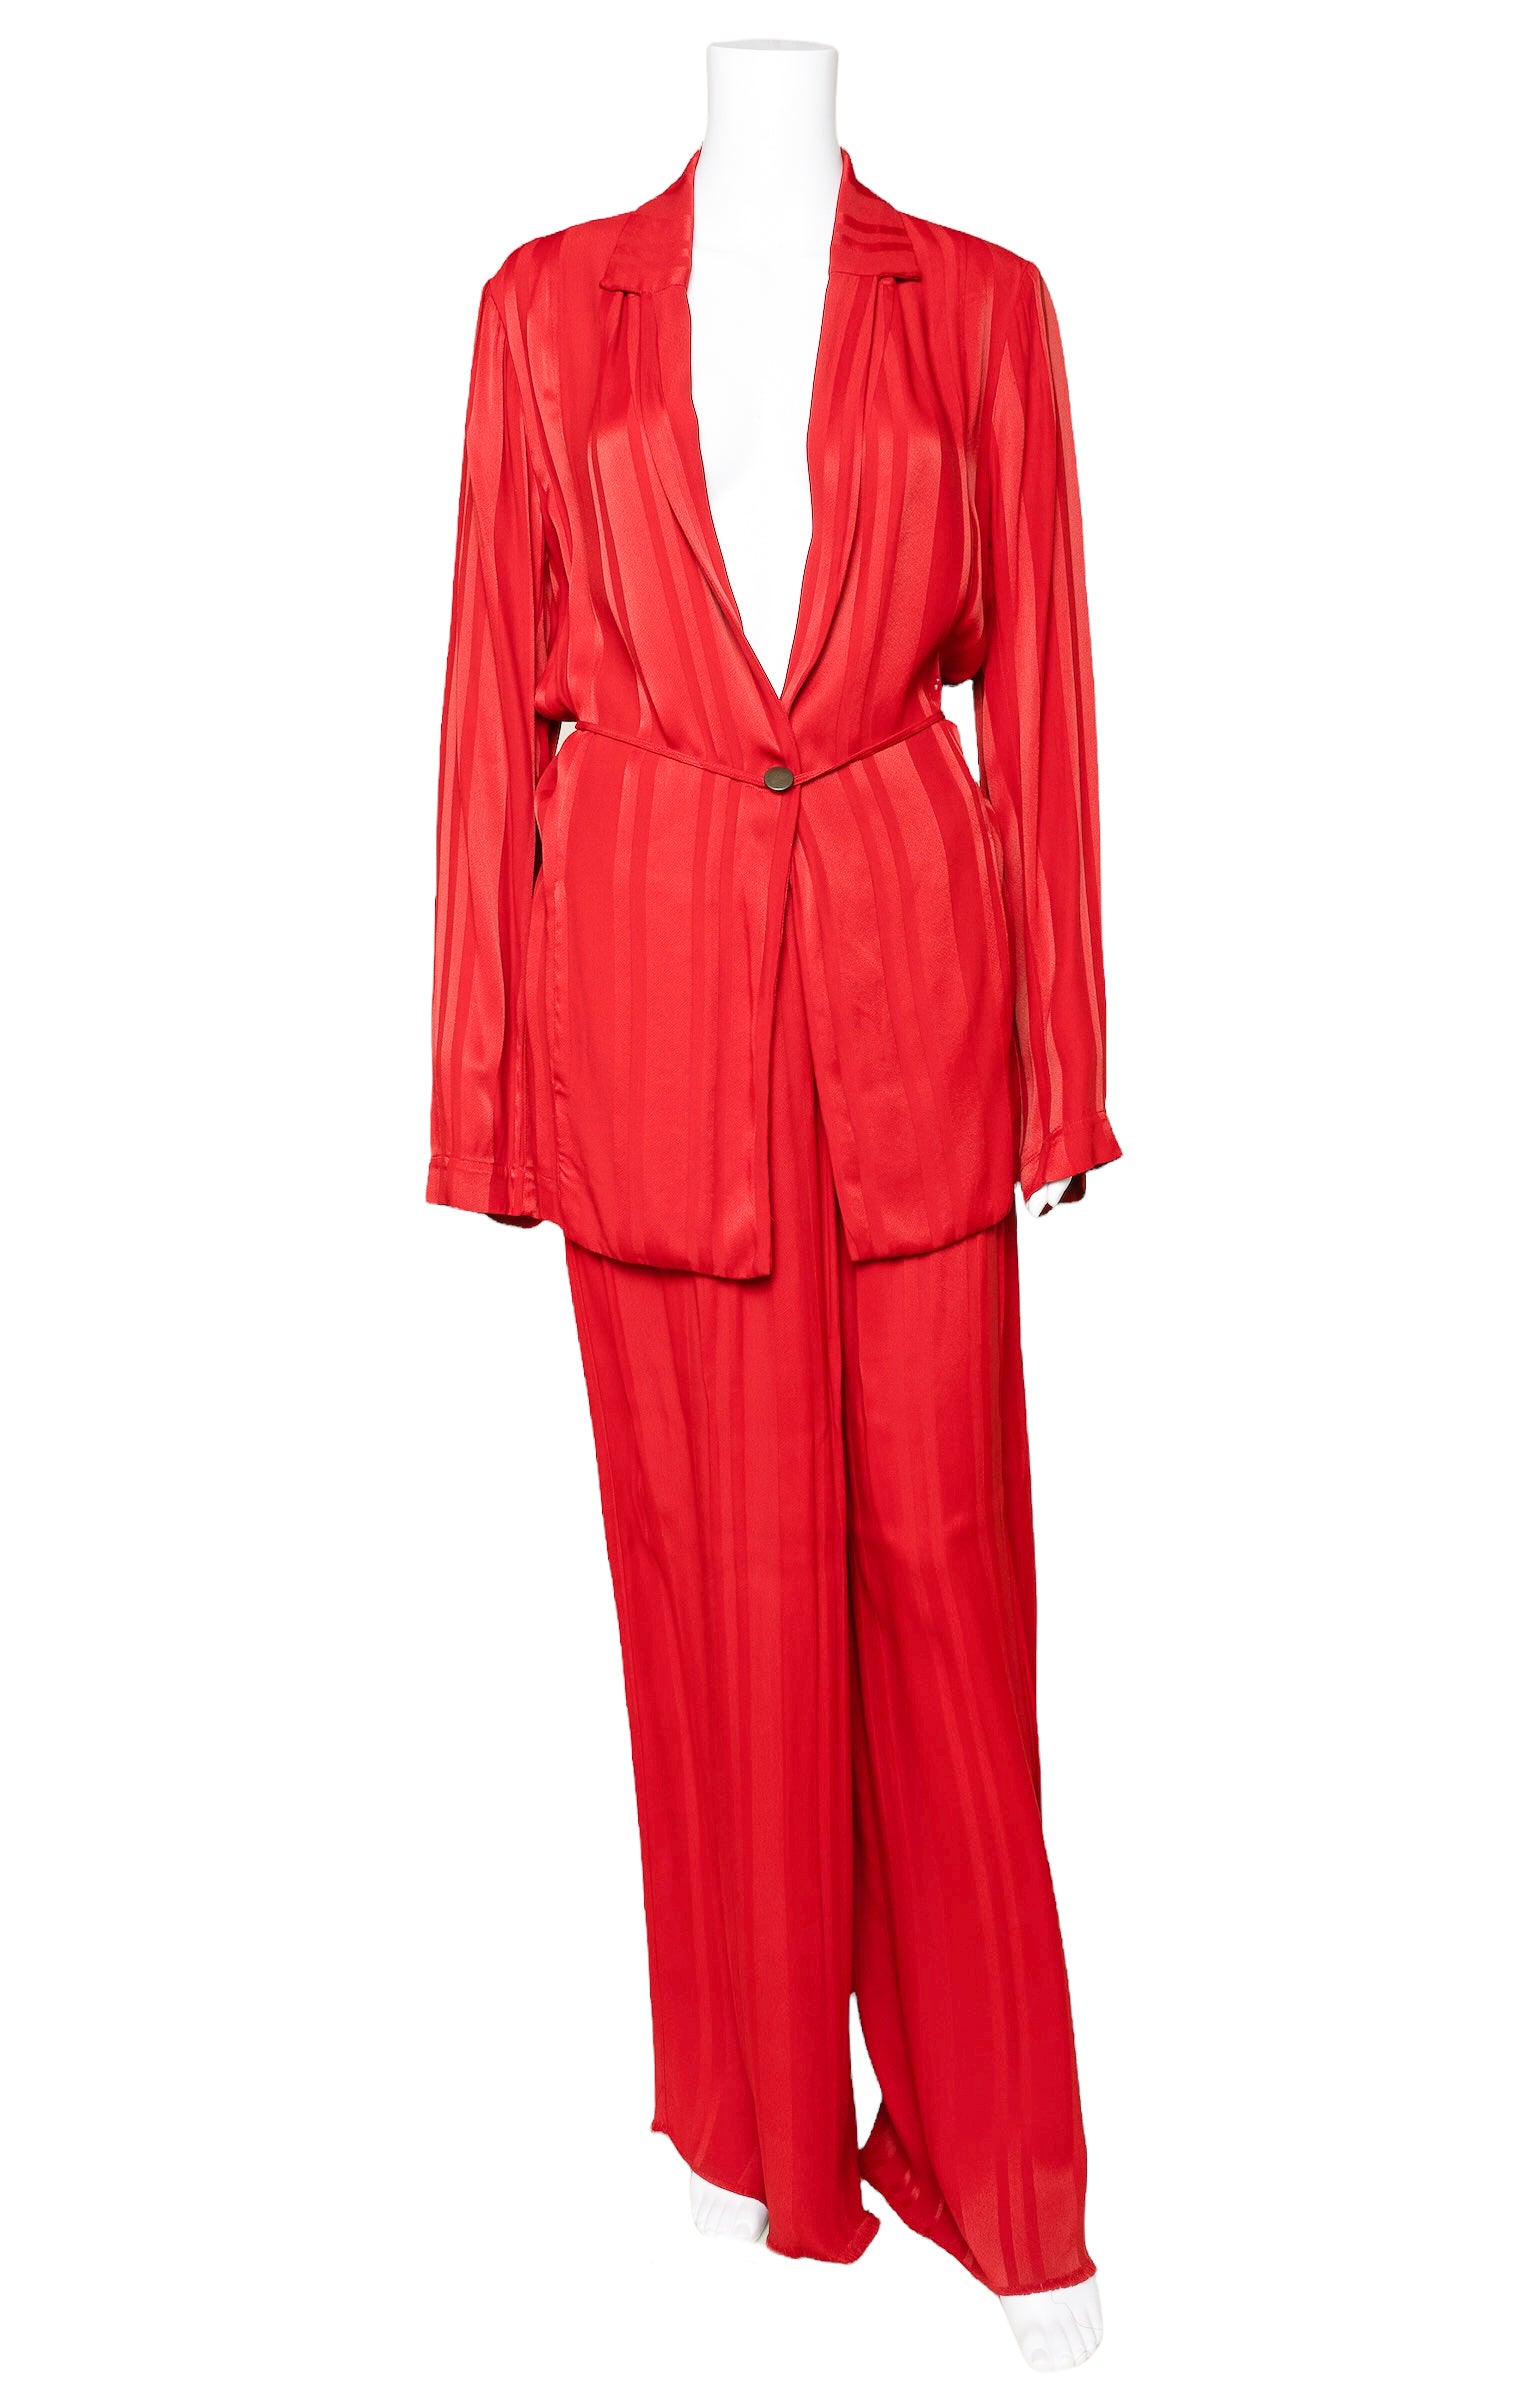 RAQUEL ALLEGRA (NEW) with tags Set Size: Jacket - 2 (M), Pants - Size 1 (S)